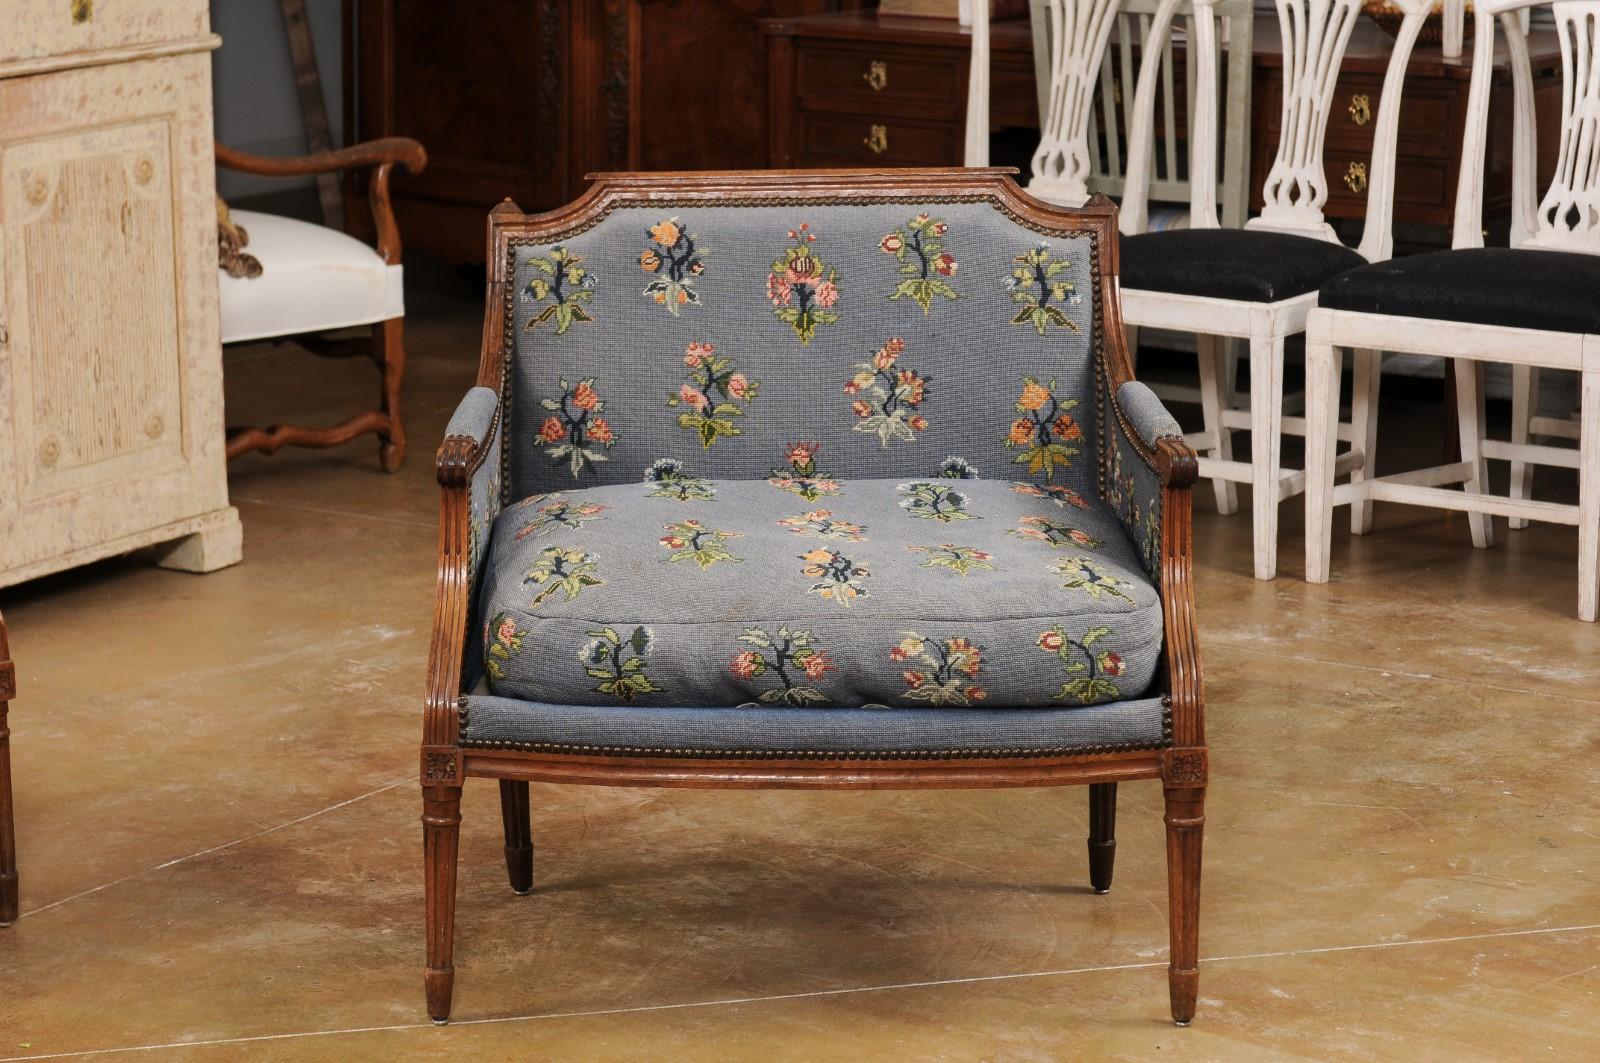 Pair of French Louis XVI Period 1790s Bergère Marquise Chairs with Upholstery In Good Condition For Sale In Atlanta, GA